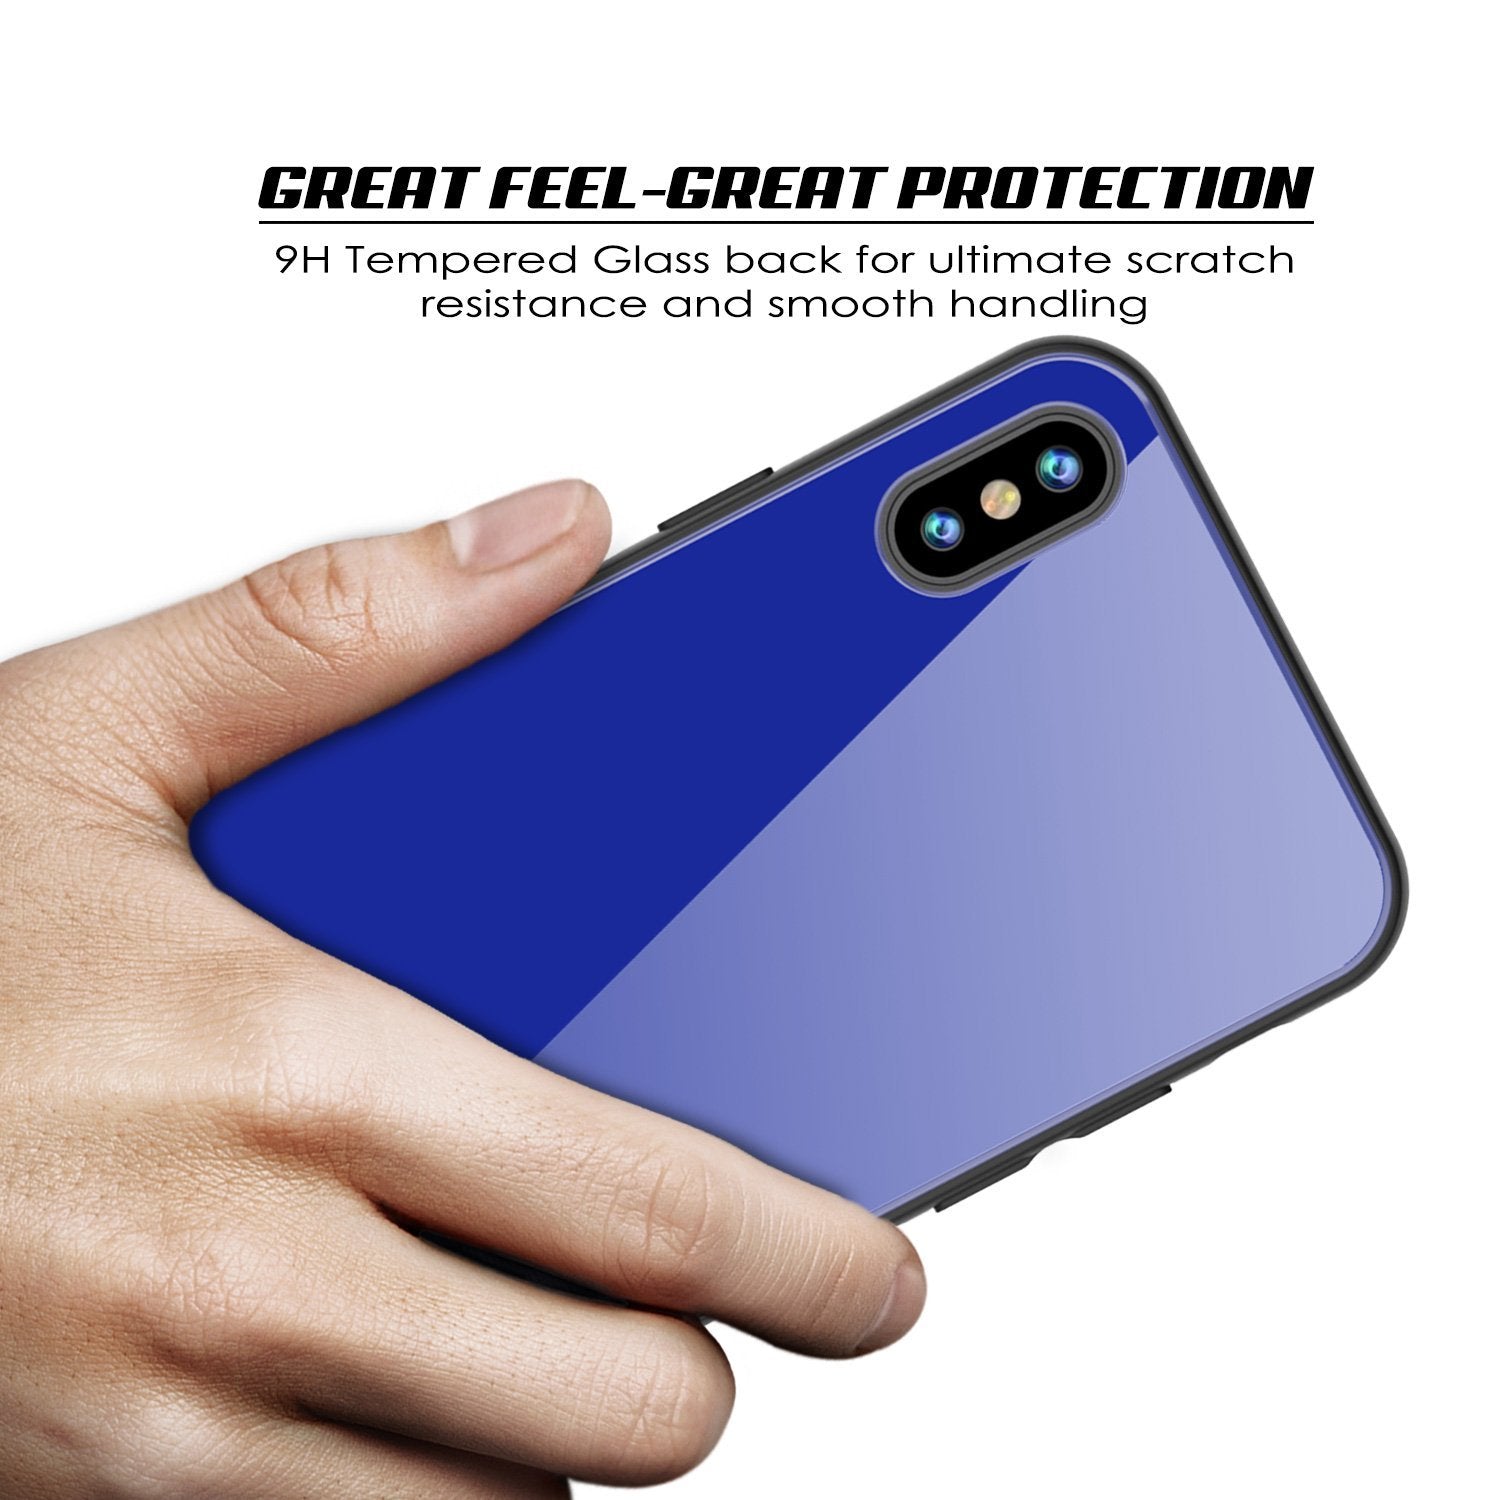 iPhone 8 Case, Punkcase GlassShield Ultra Thin Protective 9H Full Body Tempered Glass Cover W/ Drop Protection & Non Slip Grip for Apple iPhone 7 / Apple iPhone 8 (Blue)